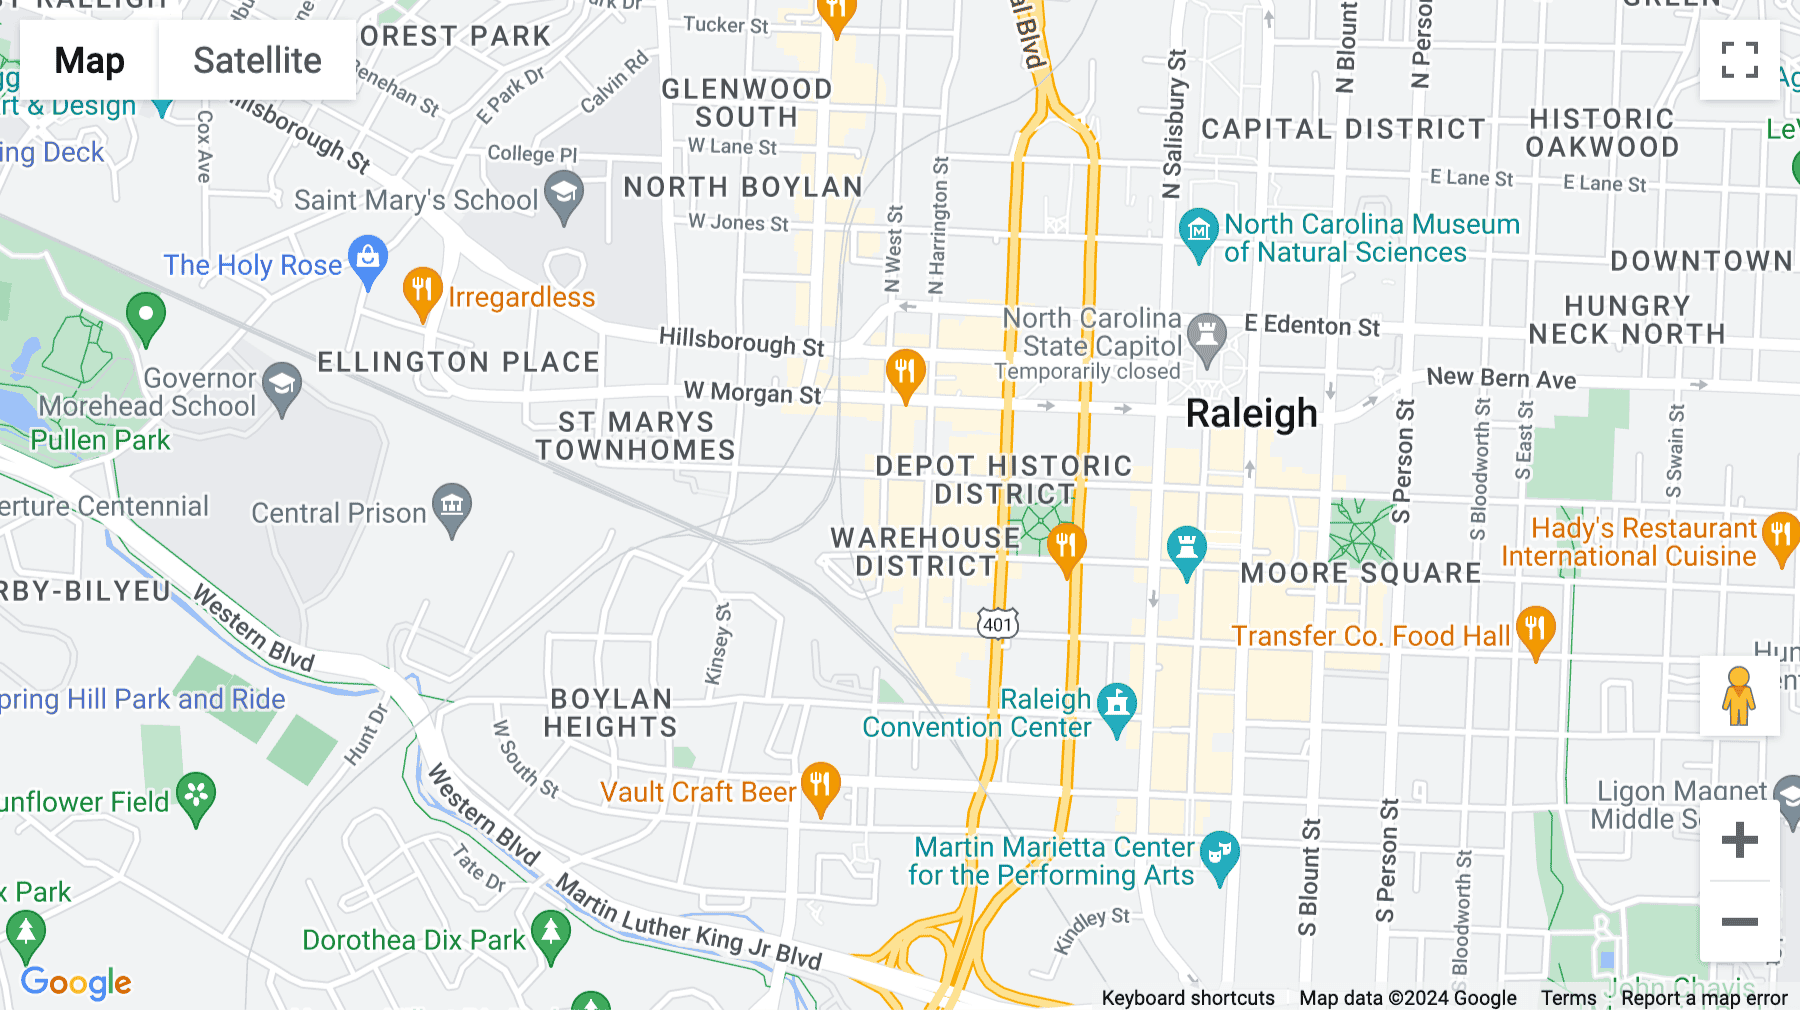 Click for interative map of The Dillon, 223 S. West Street, ,Suite 900 & 1000, Raleigh